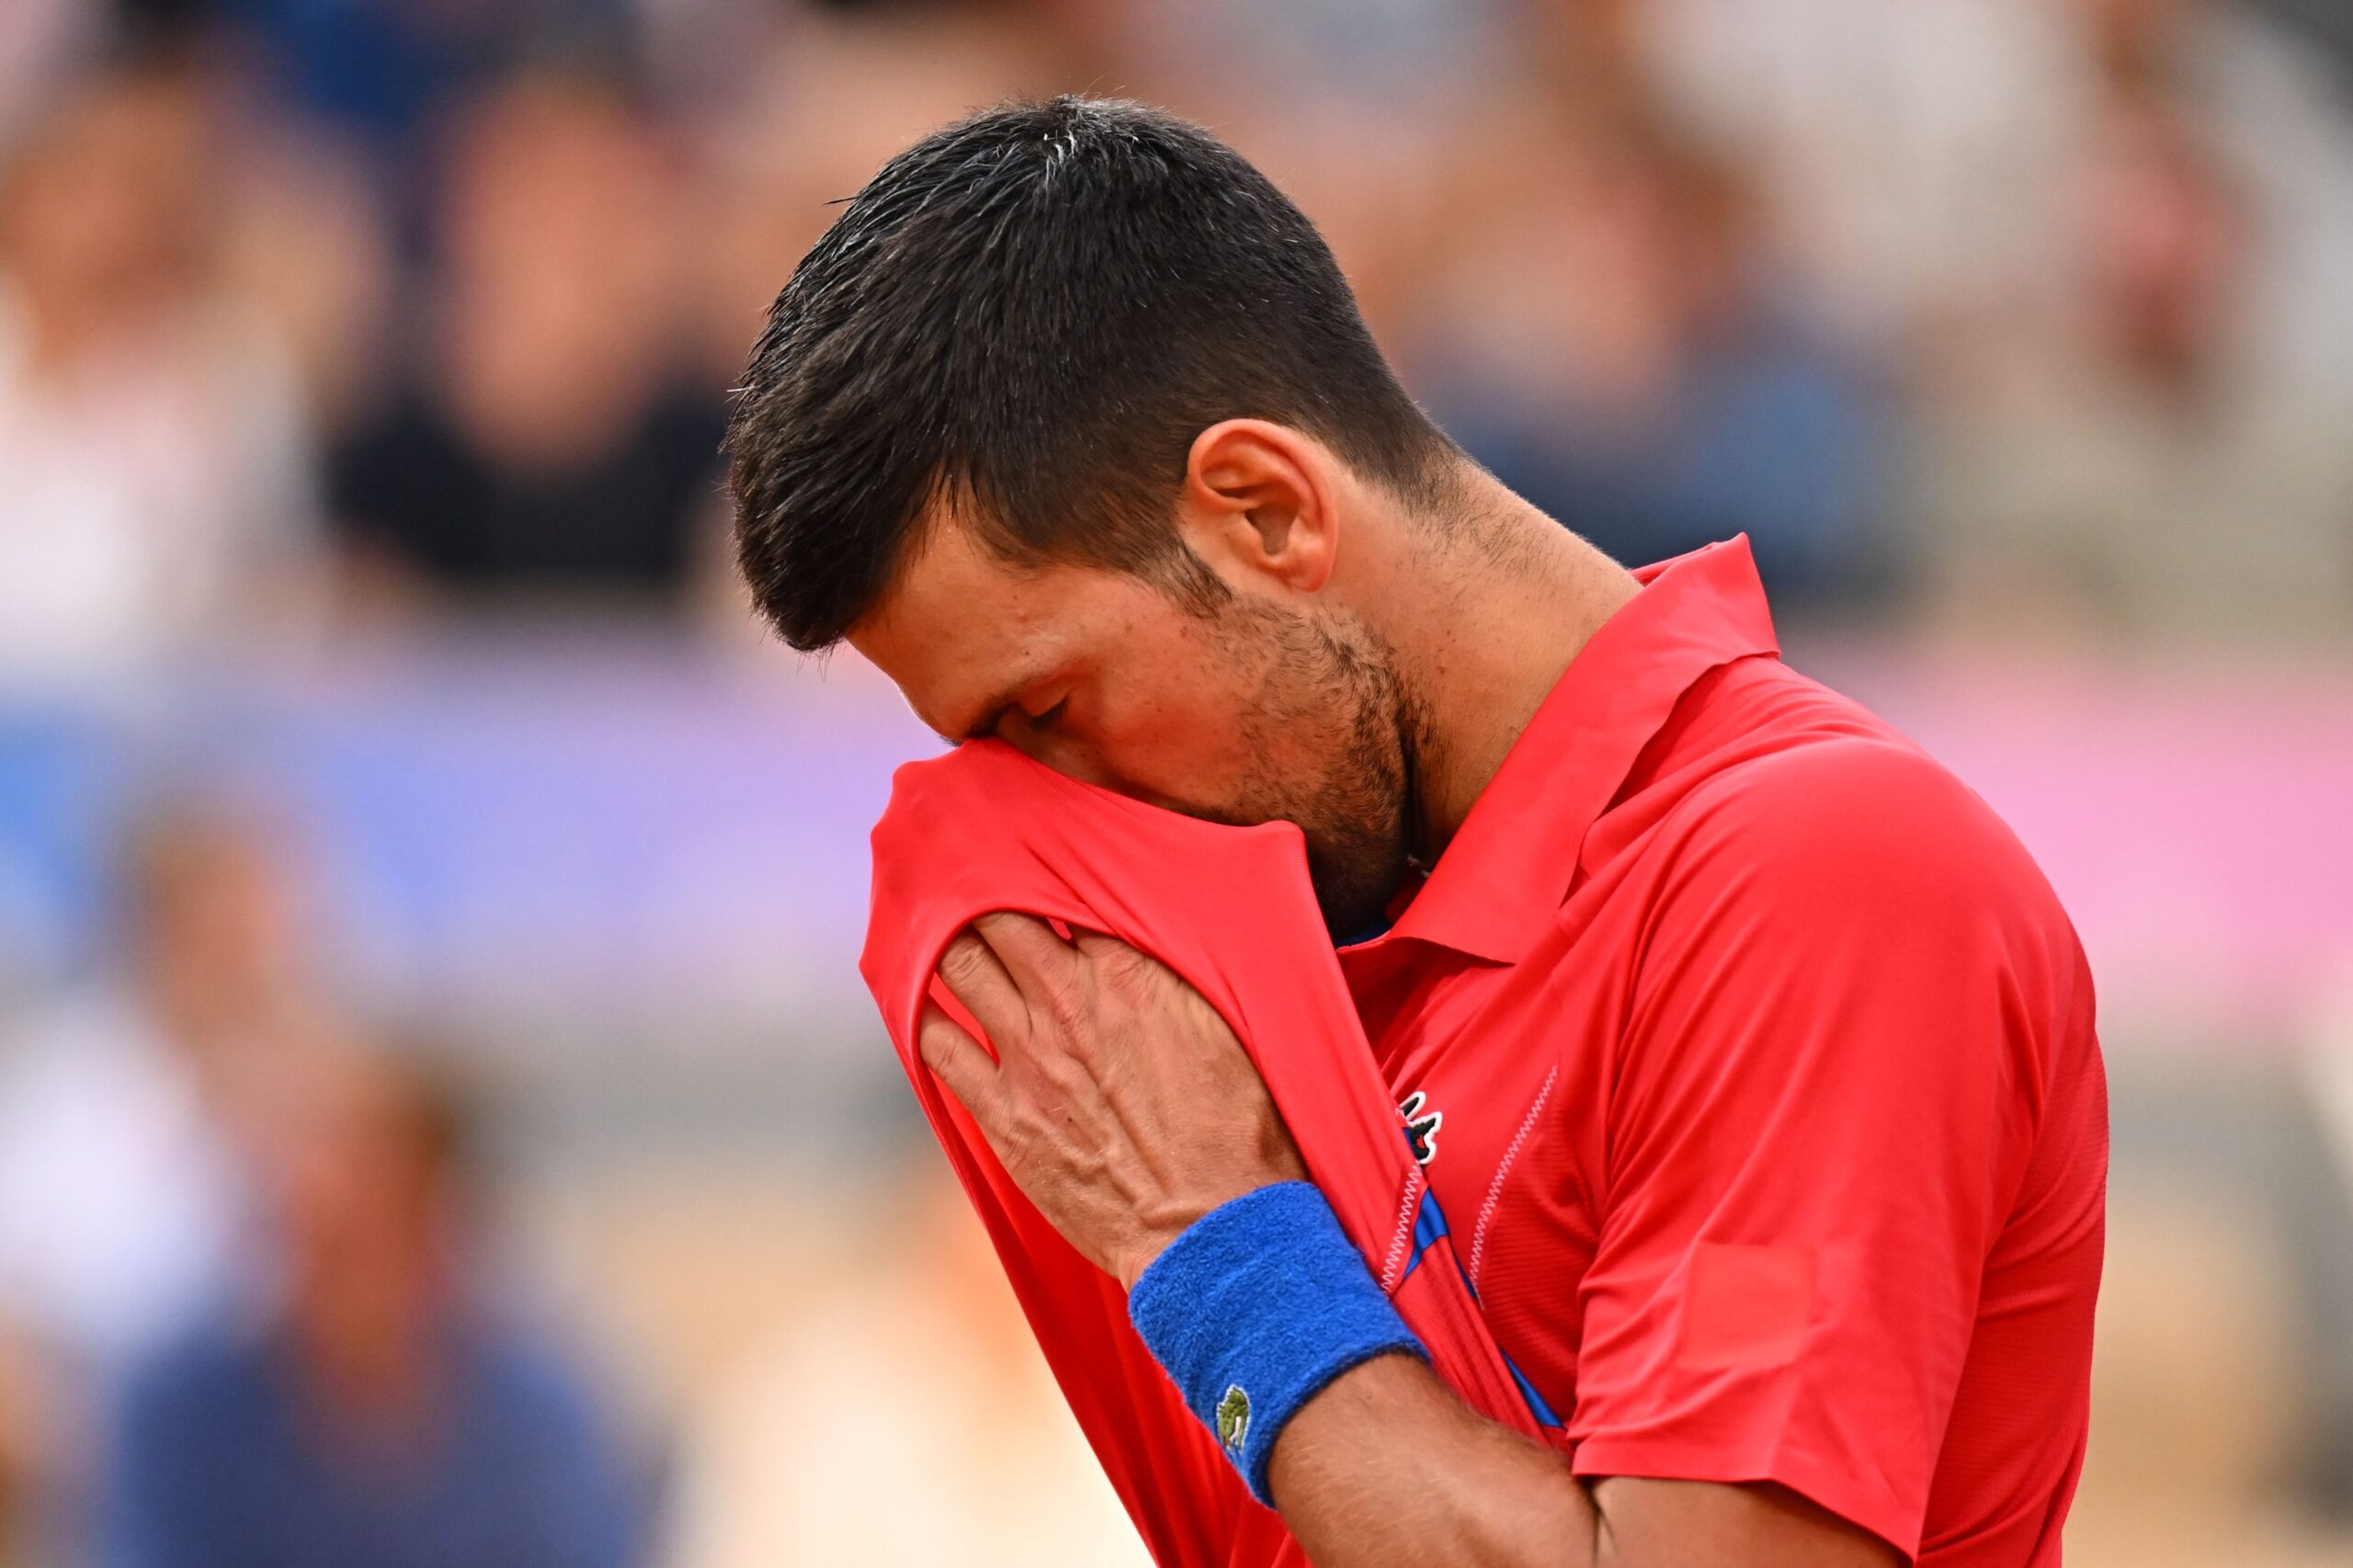 Novak Djokovic (SRB) during his quarter final match at the 2024 Olympics Games at Roland Garros arena in Paris, France on August 1, 2024. Photo by Corinne Dubreuil/ABACAPRESS.COM